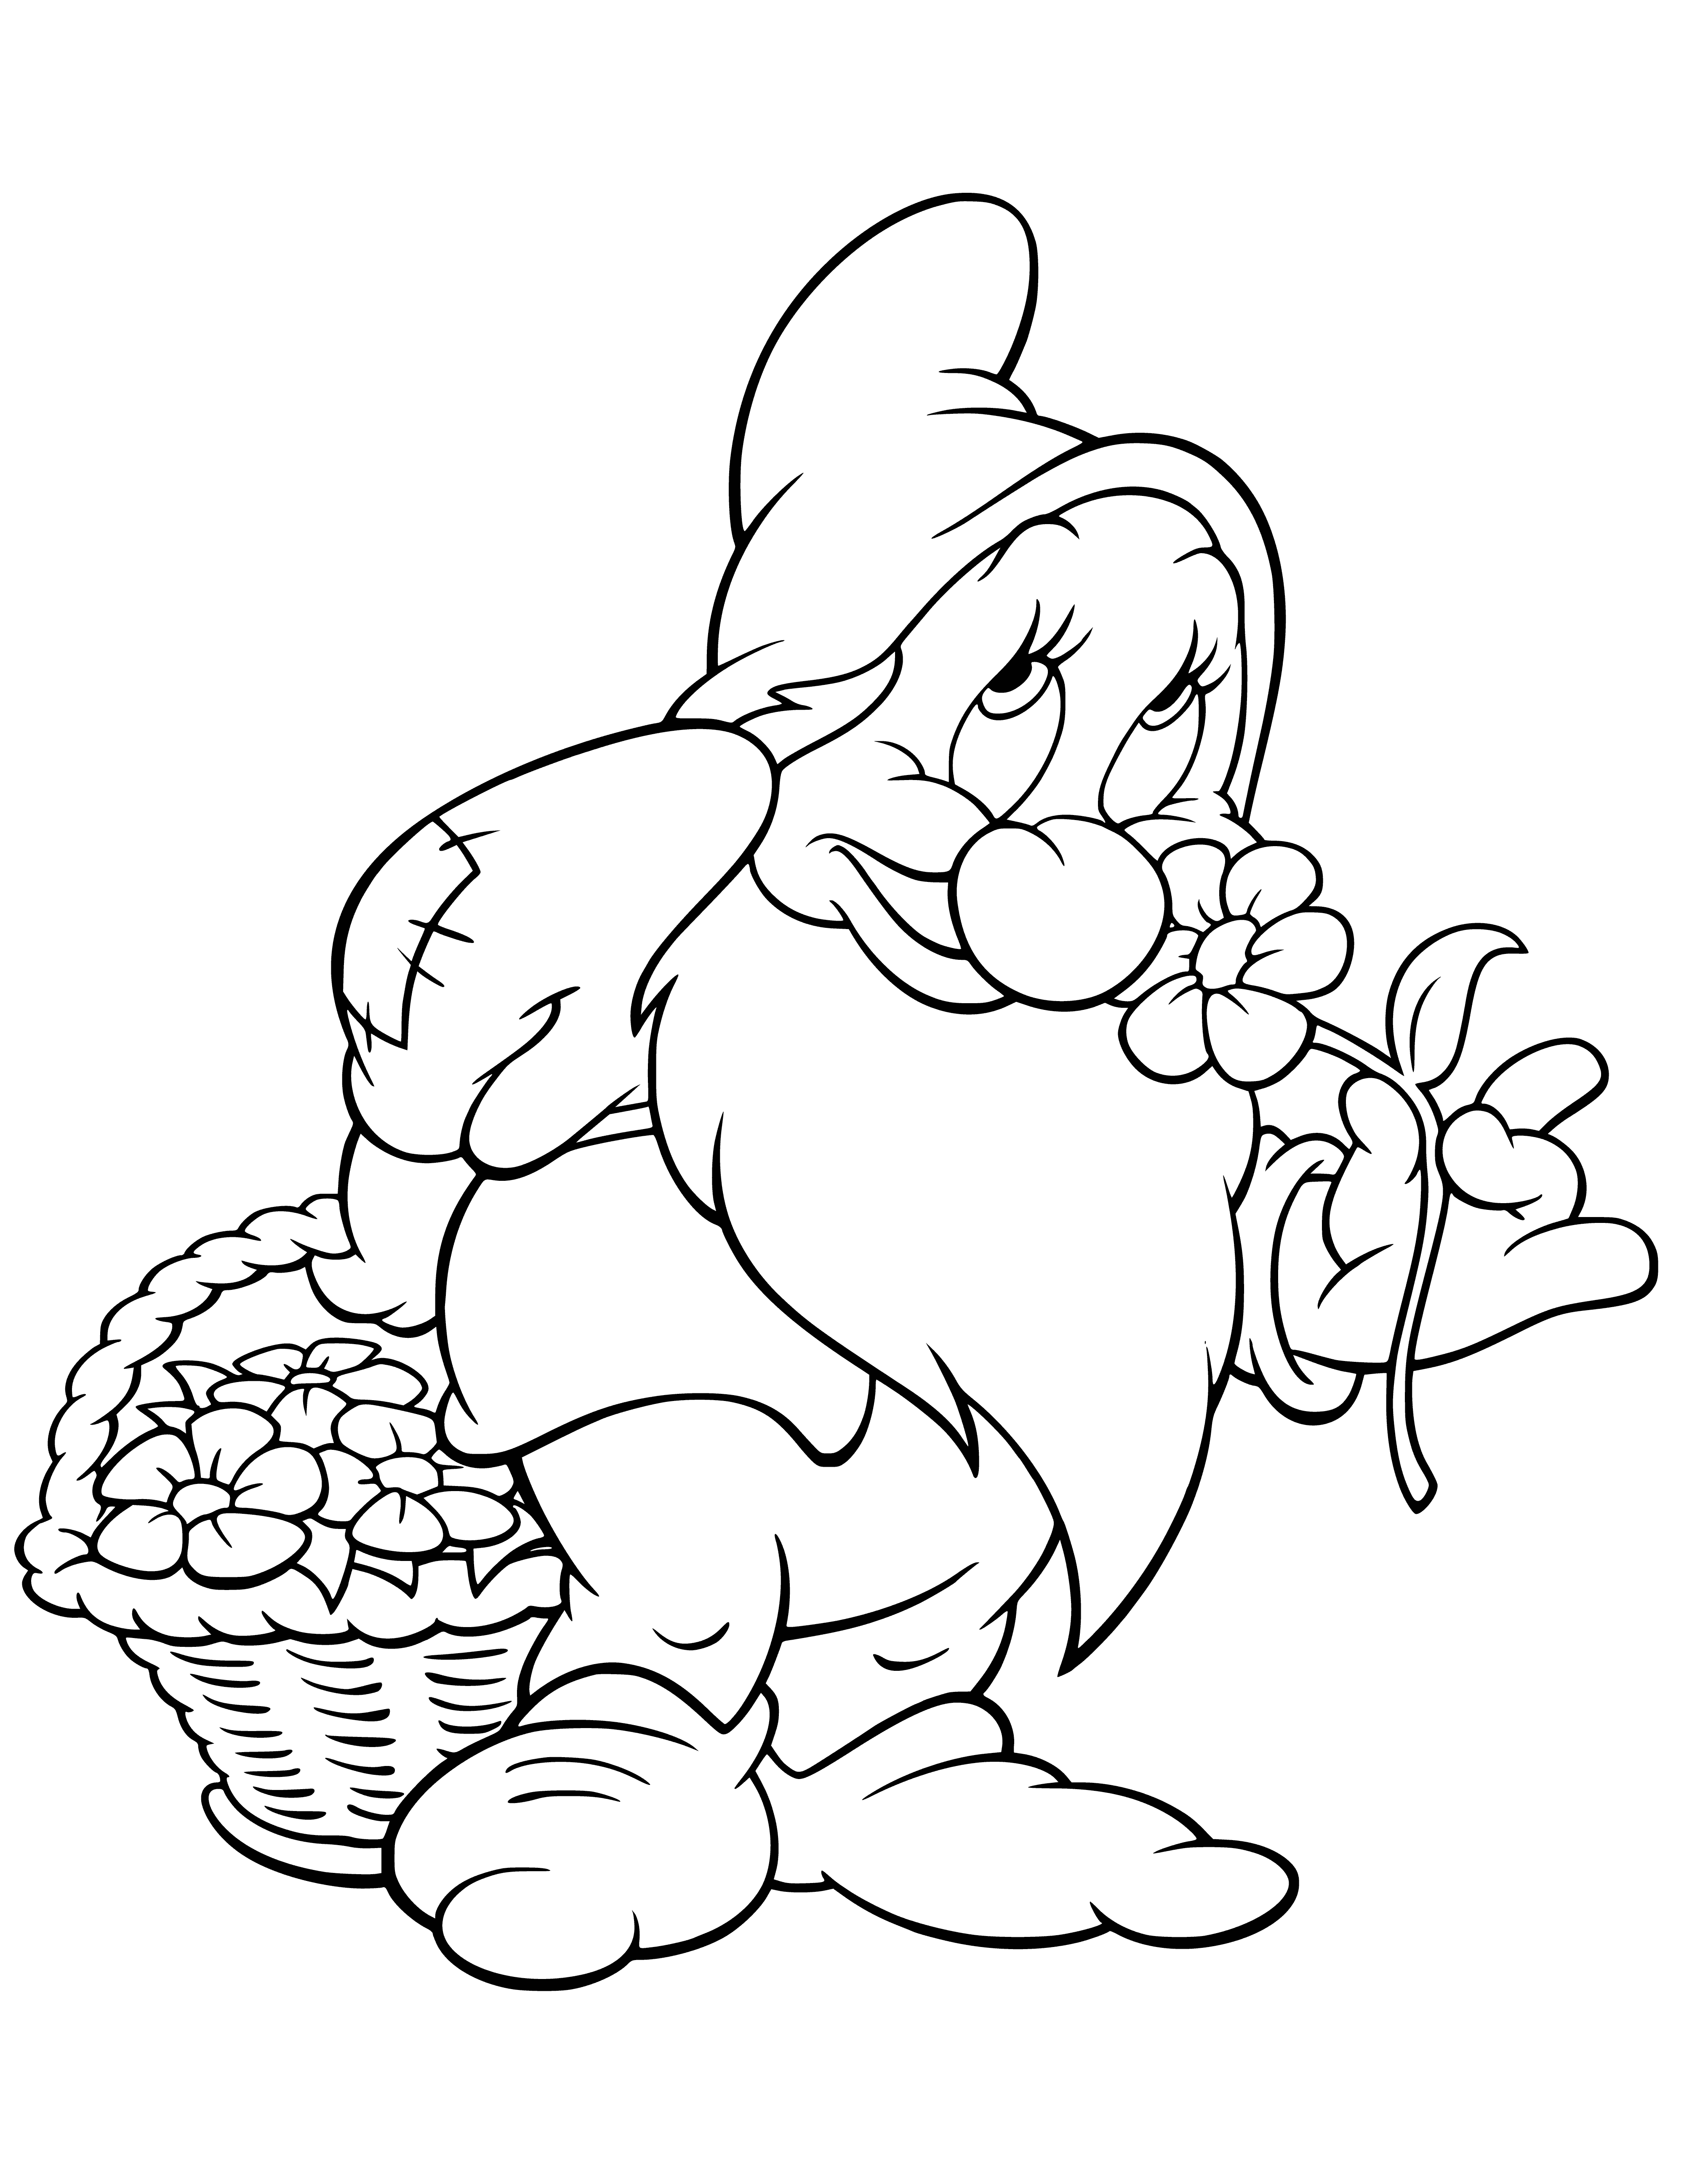 coloring page: A Dwarf Quiet stands with a basket of seven small, white flowers, dressed in a blue and white hat, red and white shirt, and brown pants. He has a light brown beard, eyebrows, and pack on his back, carrying a brown walking stick in his left hand.